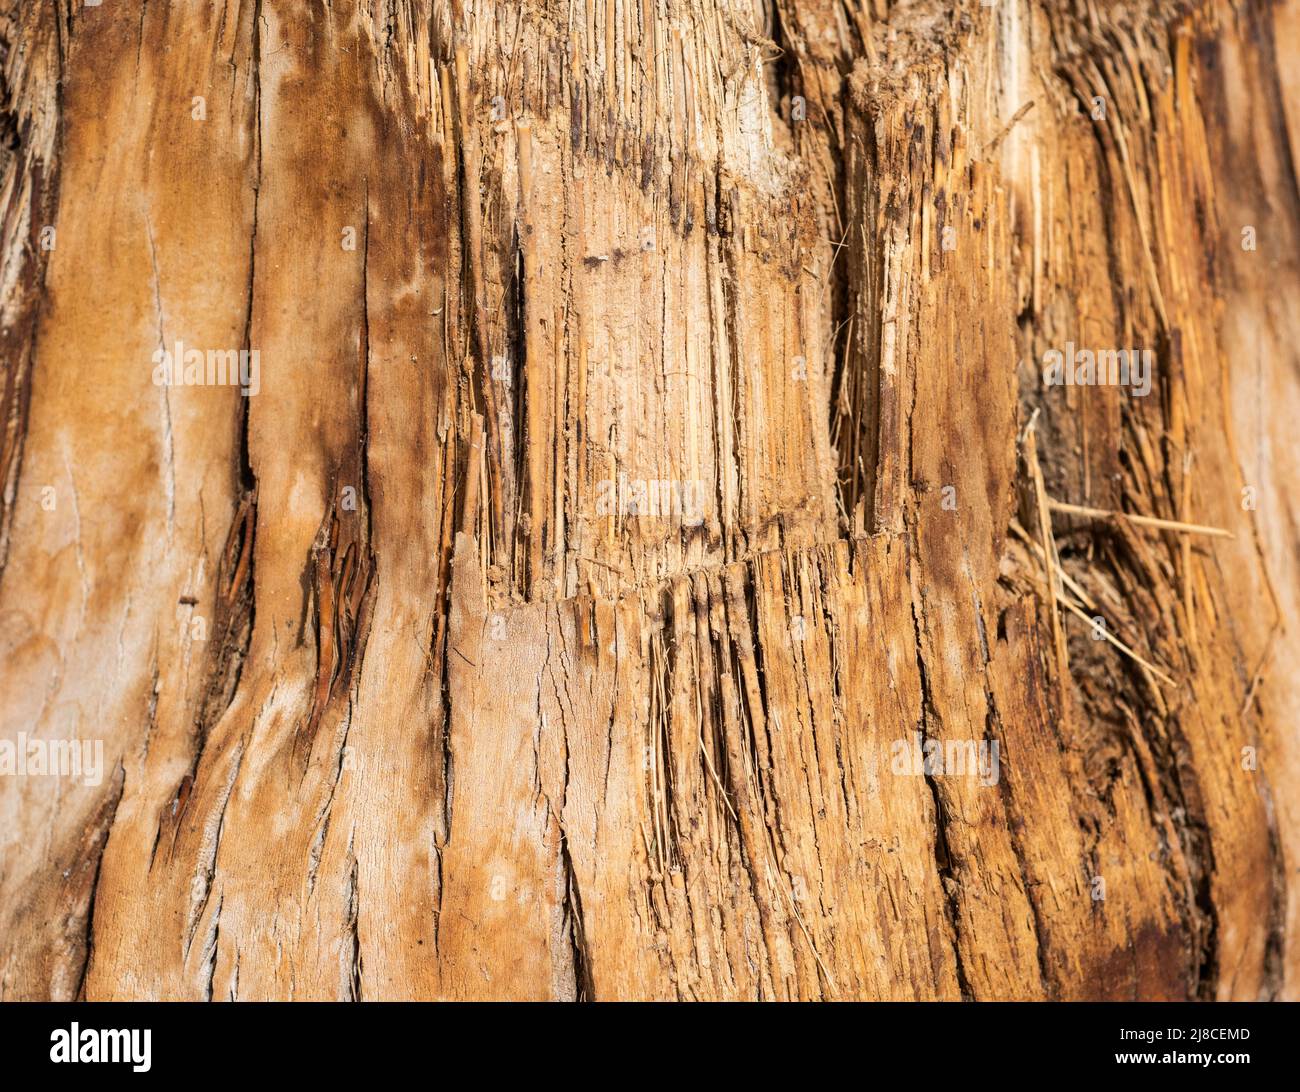 Closeup detail of bark on tree trunk abstract background wallpaper texture Stock Photo